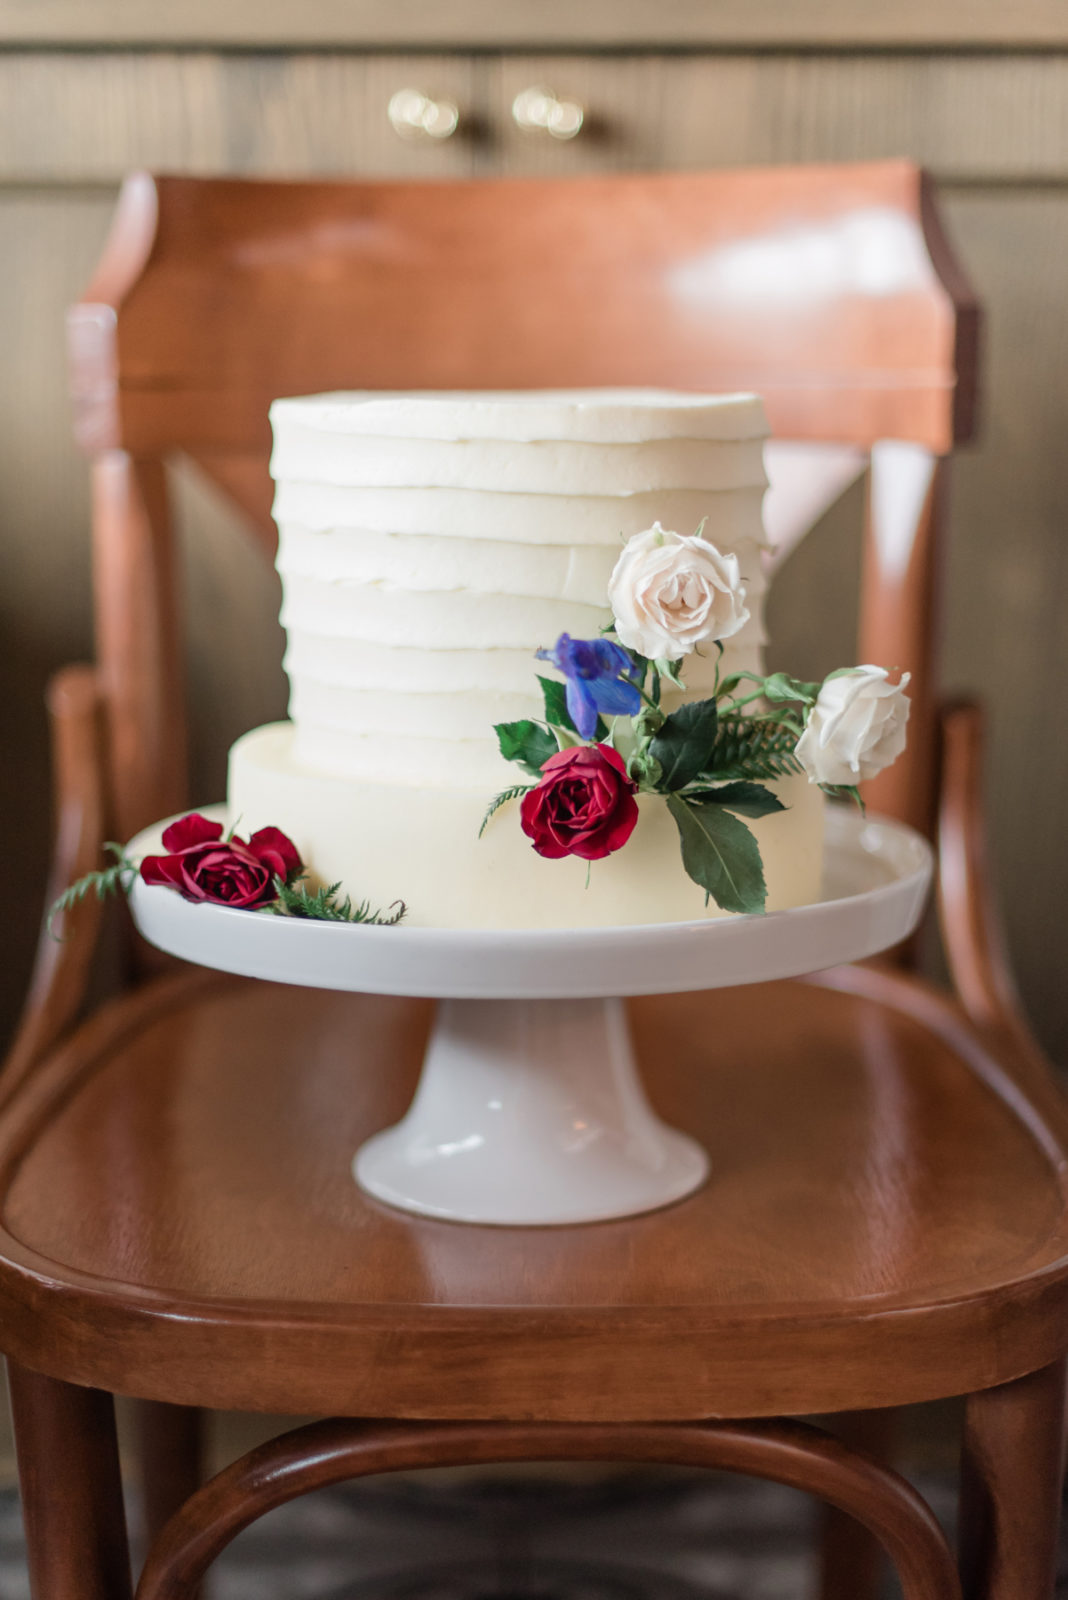 Romantically Regal Bridal Inspiration at the Royale YYC - wedding inspiration featured on Brontë Bride, wedding cake, floral cake